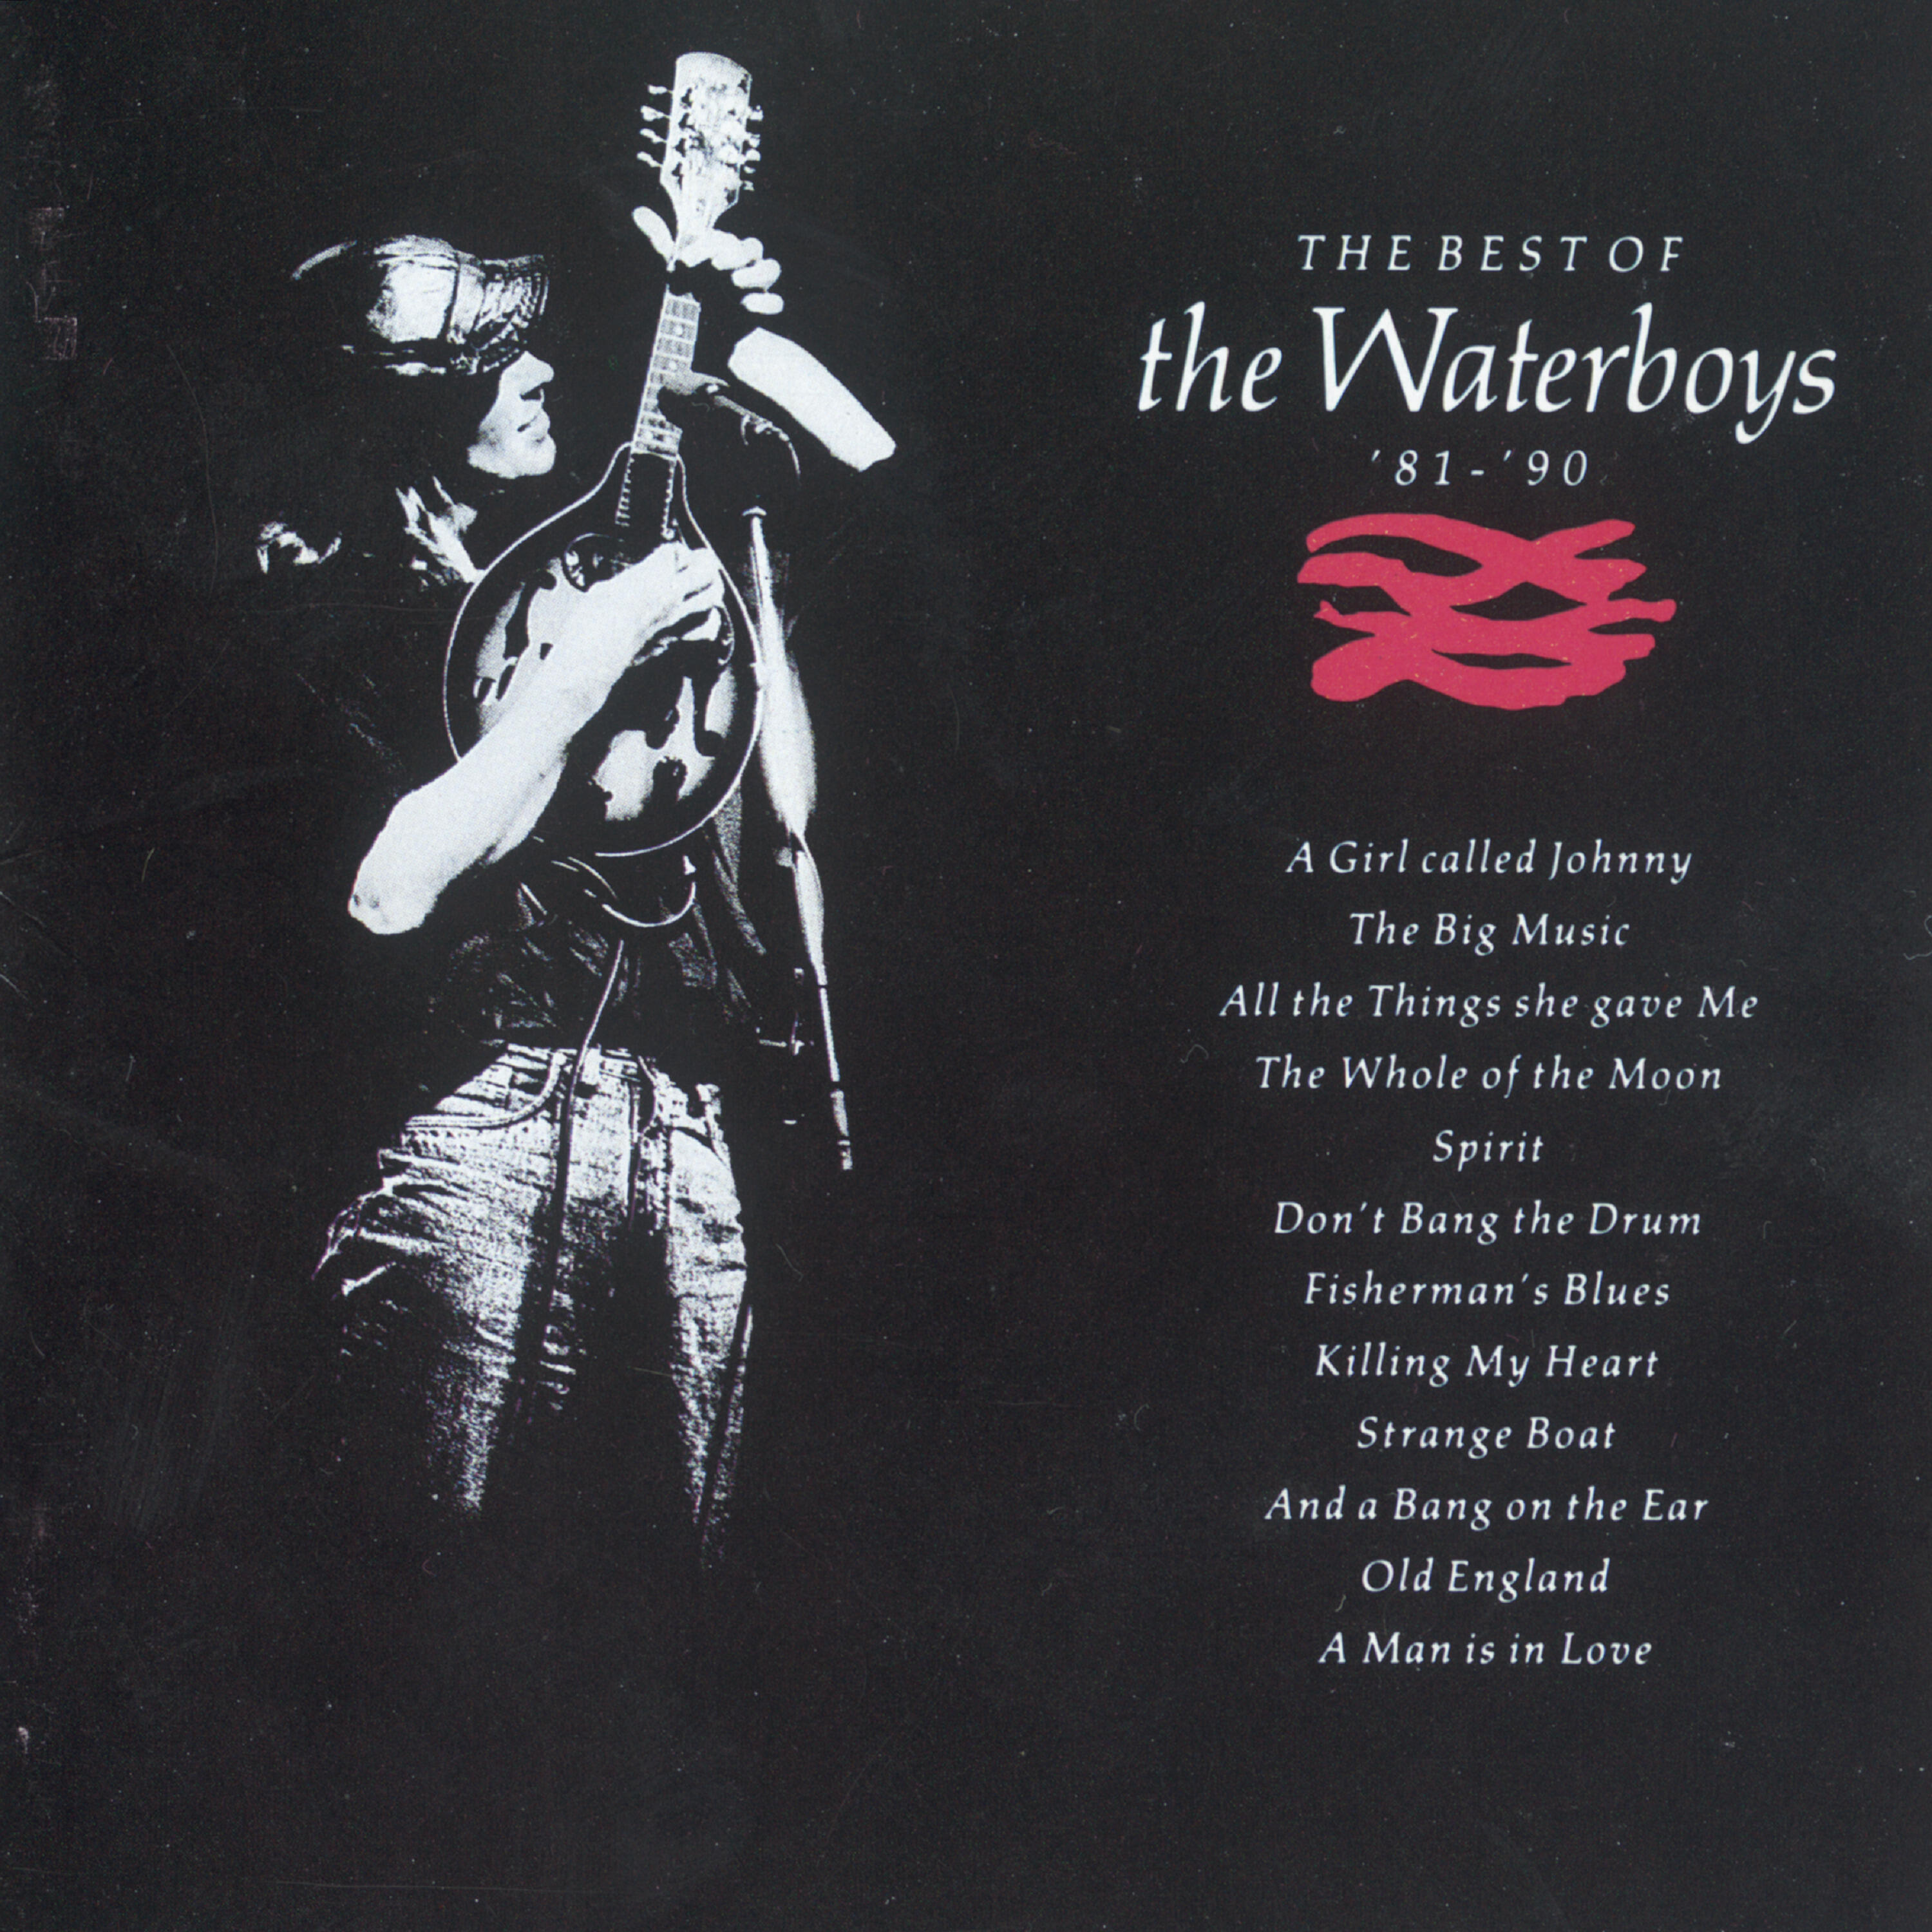 The Waterboys The Best of The Waterboys (19811990) iHeart